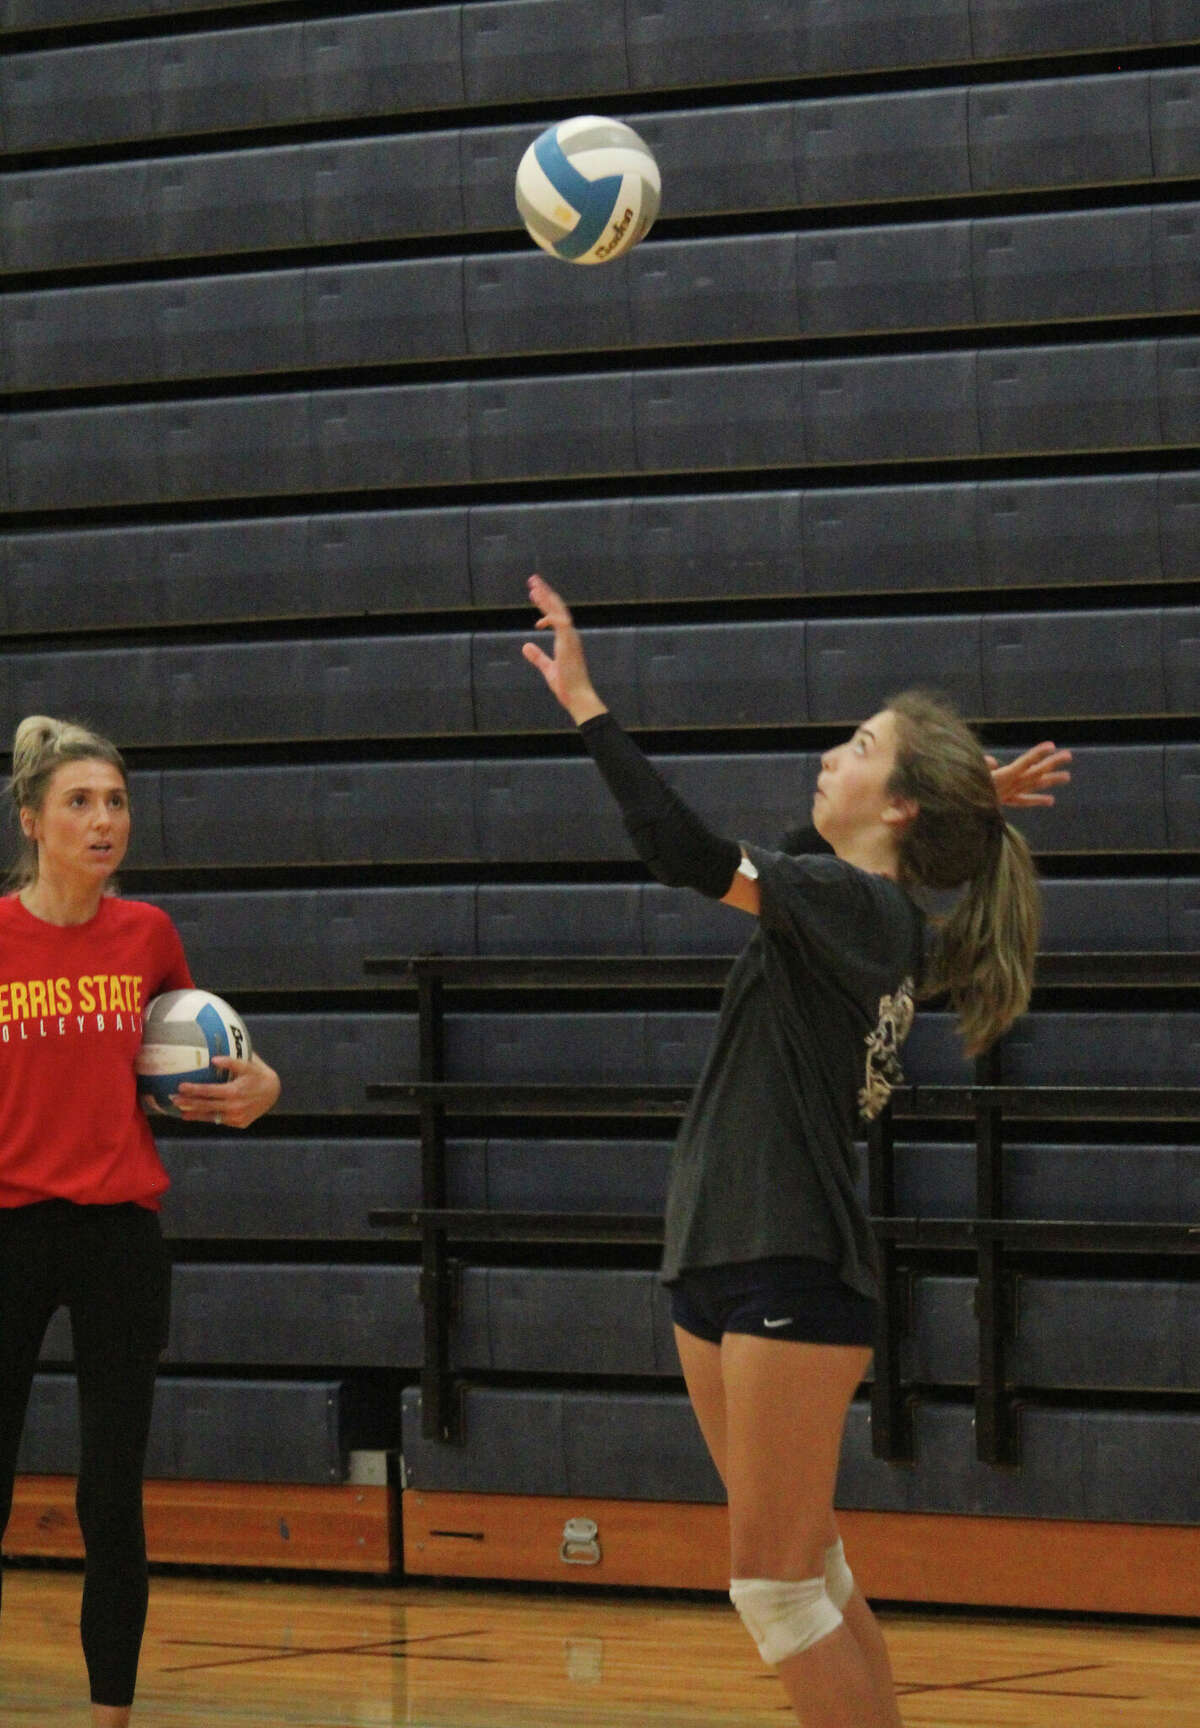 Ferris State assistant volleyball coach Hannah (Nimrick) Wuest watches as Big Rapids' Kate Strasser serves the ball on Thursday during a Cardinal volleyball camp.